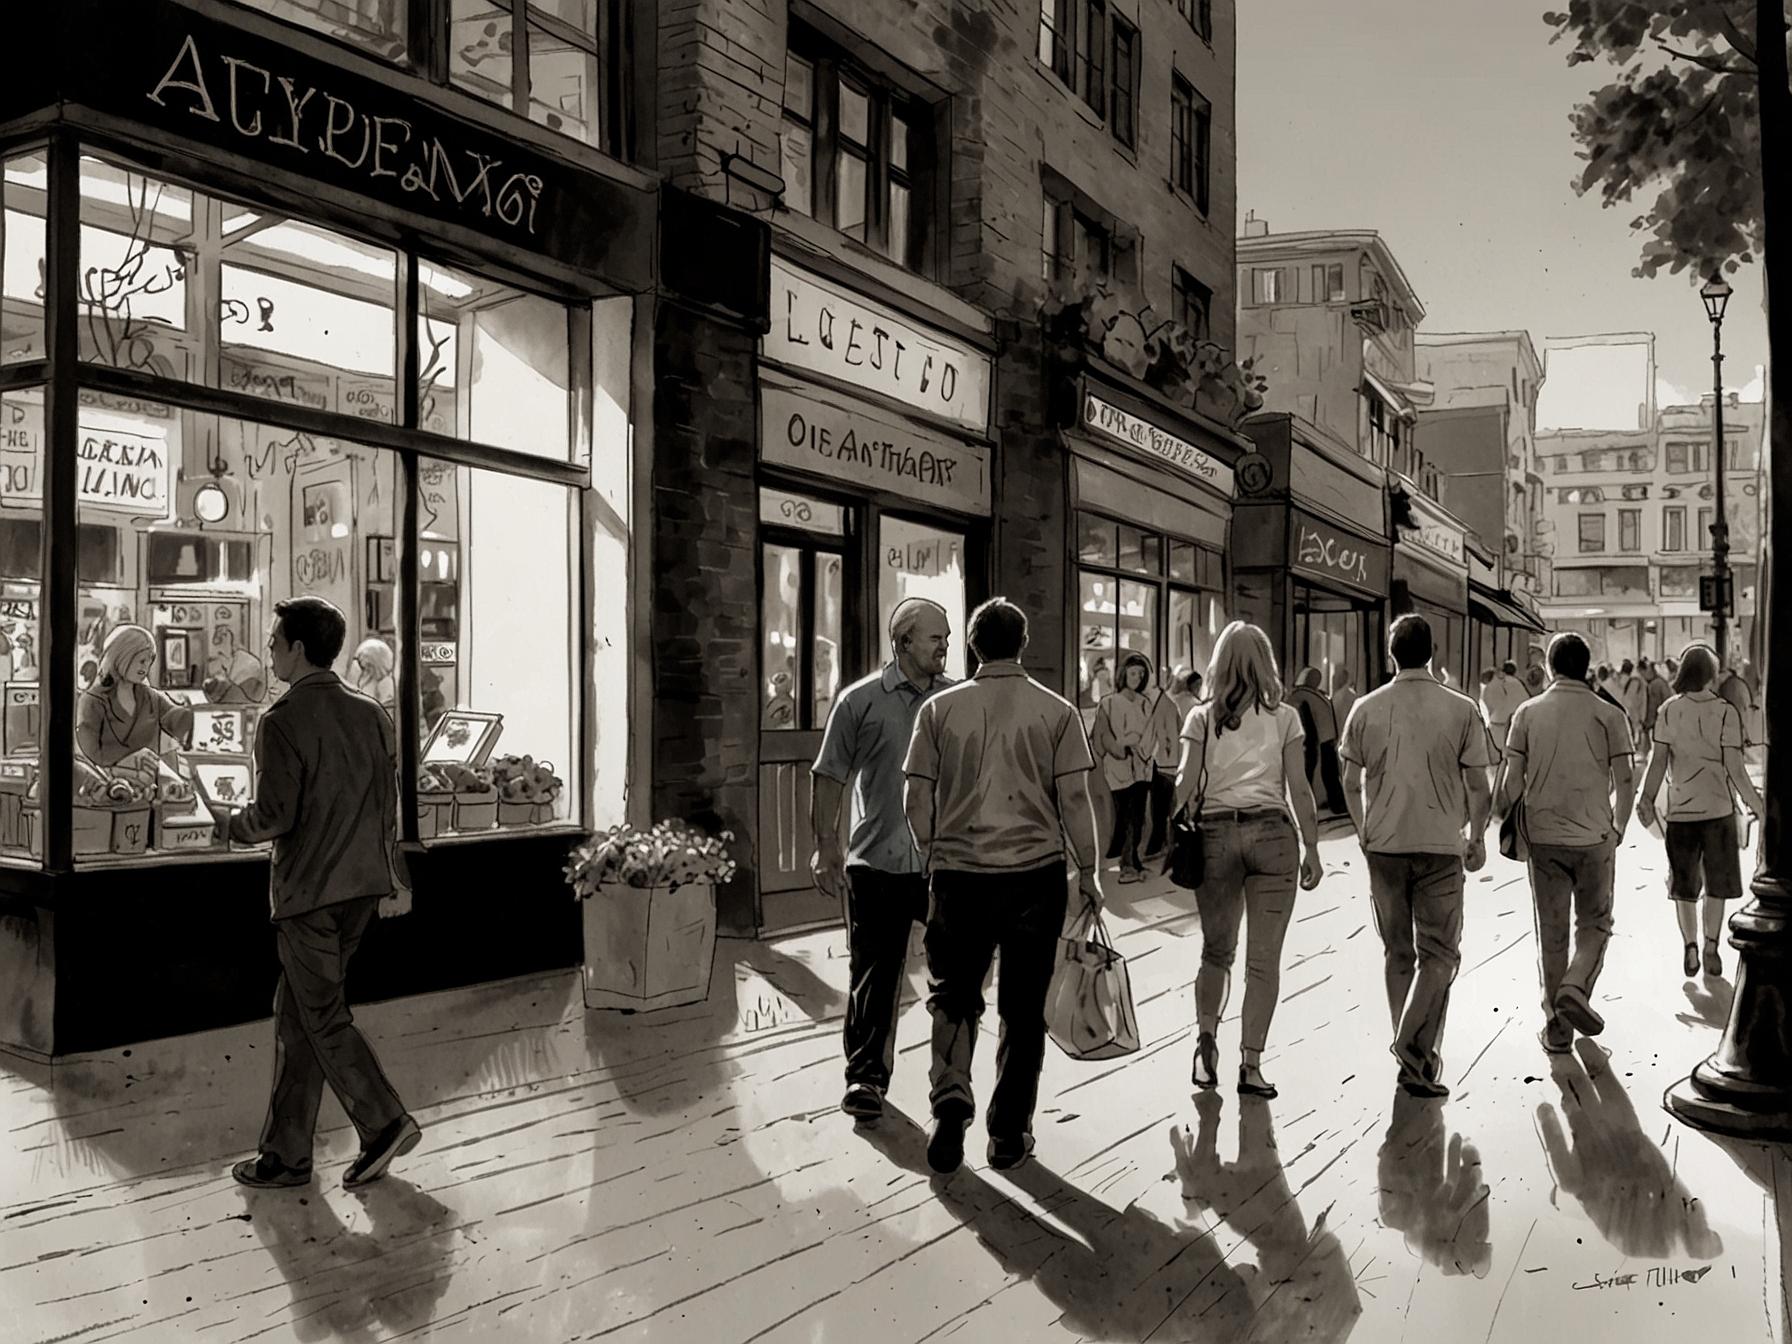 An image illustrating robust consumer activity with people shopping and dining out, emphasizing how strong consumer spending has helped drive the U.S. economic growth in the last quarter.